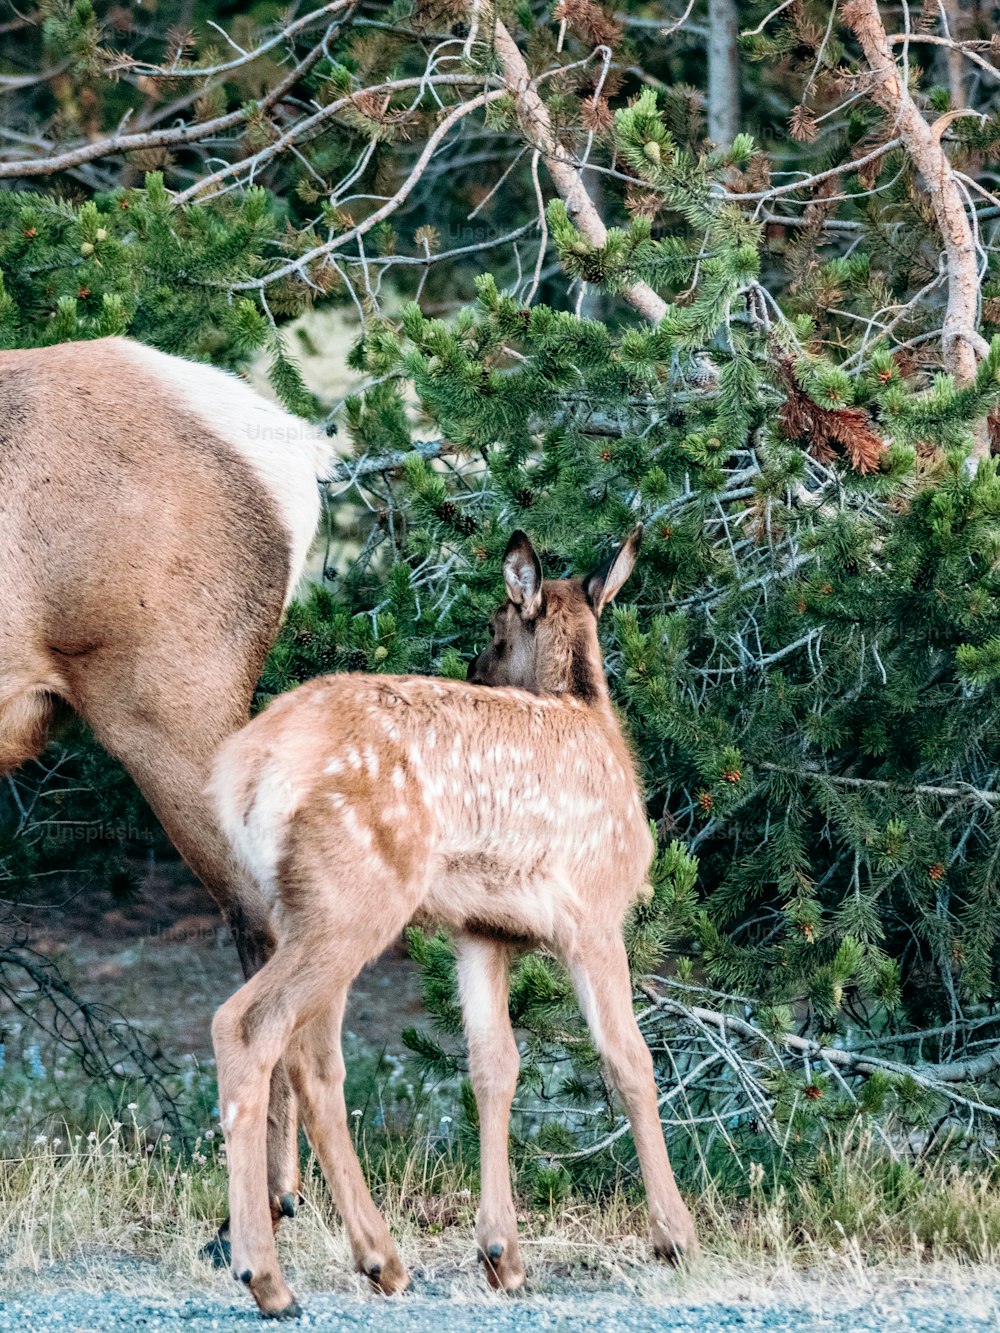 a deer and a baby deer standing next to each other